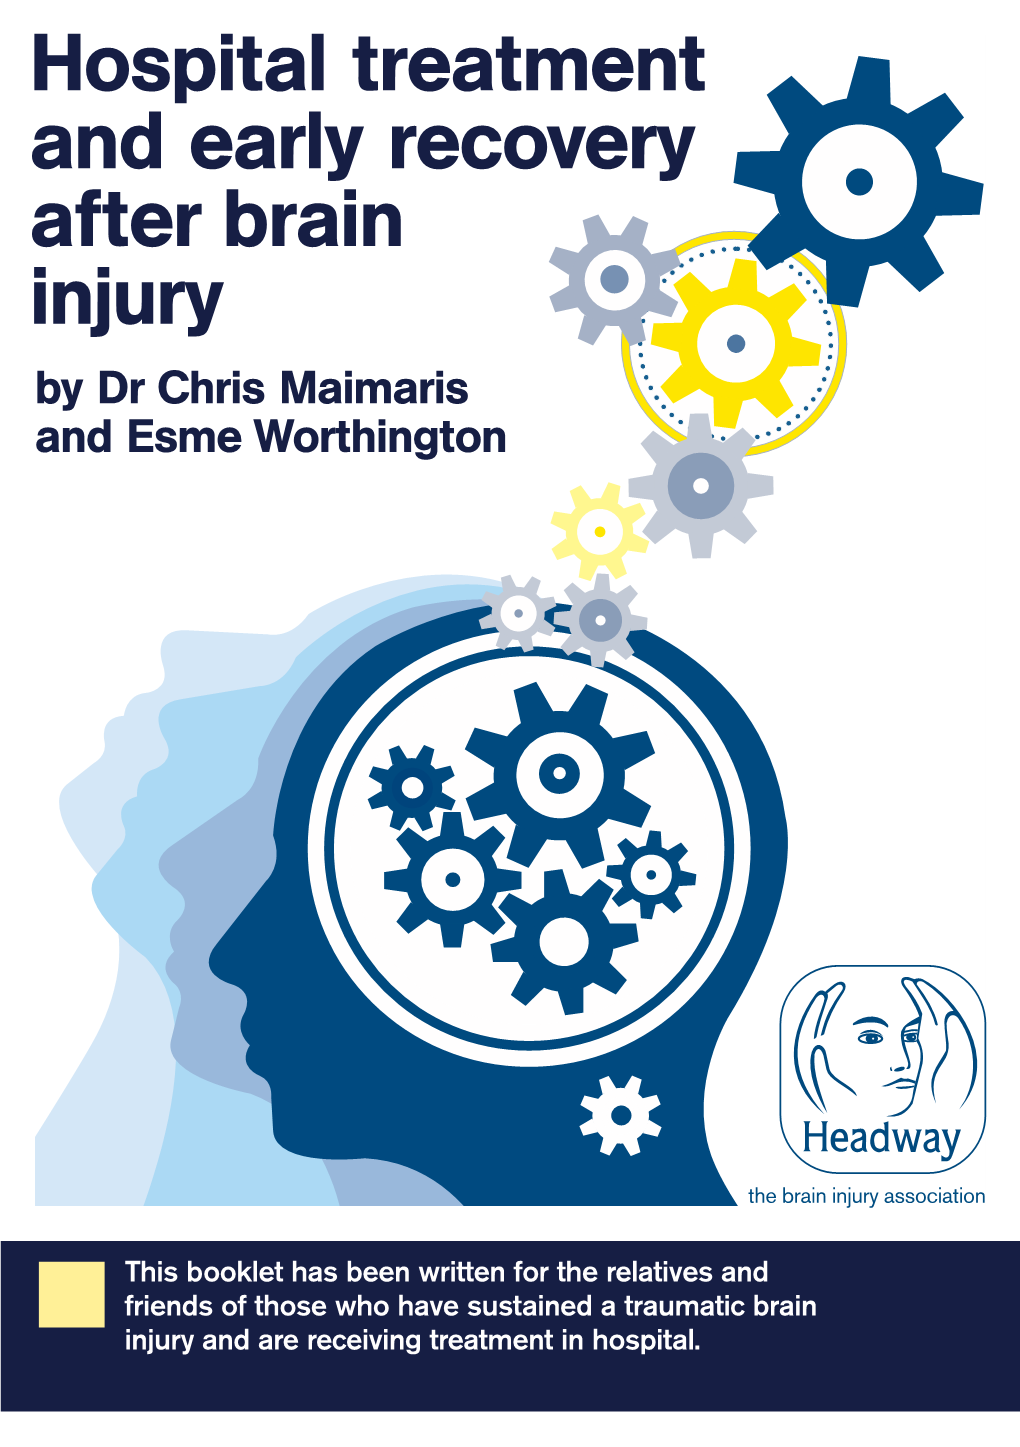 Hospital Treatment and Early Recovery After Brain Injury by Dr Chris Maimaris and Esme Worthington